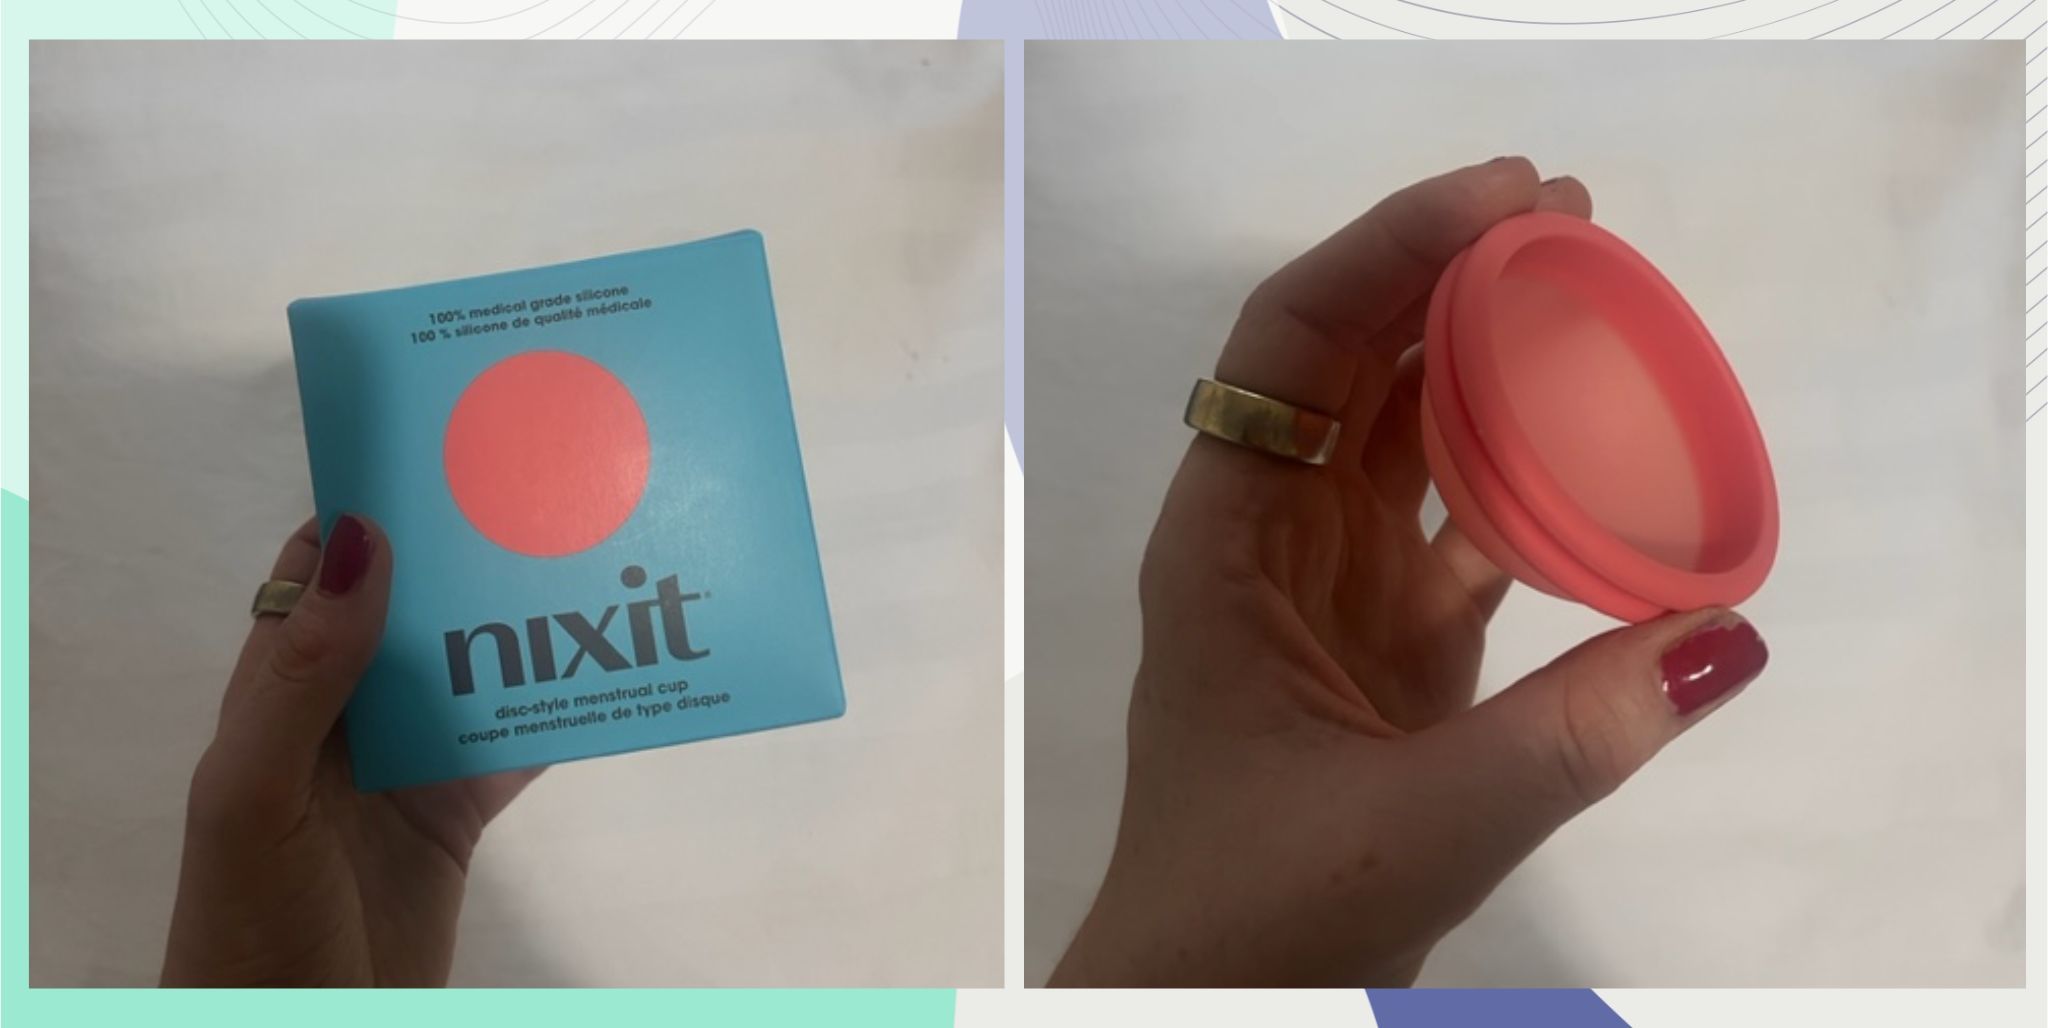 Nixit review: The disc-style menstrual cup that boasts 12 hours of  protection